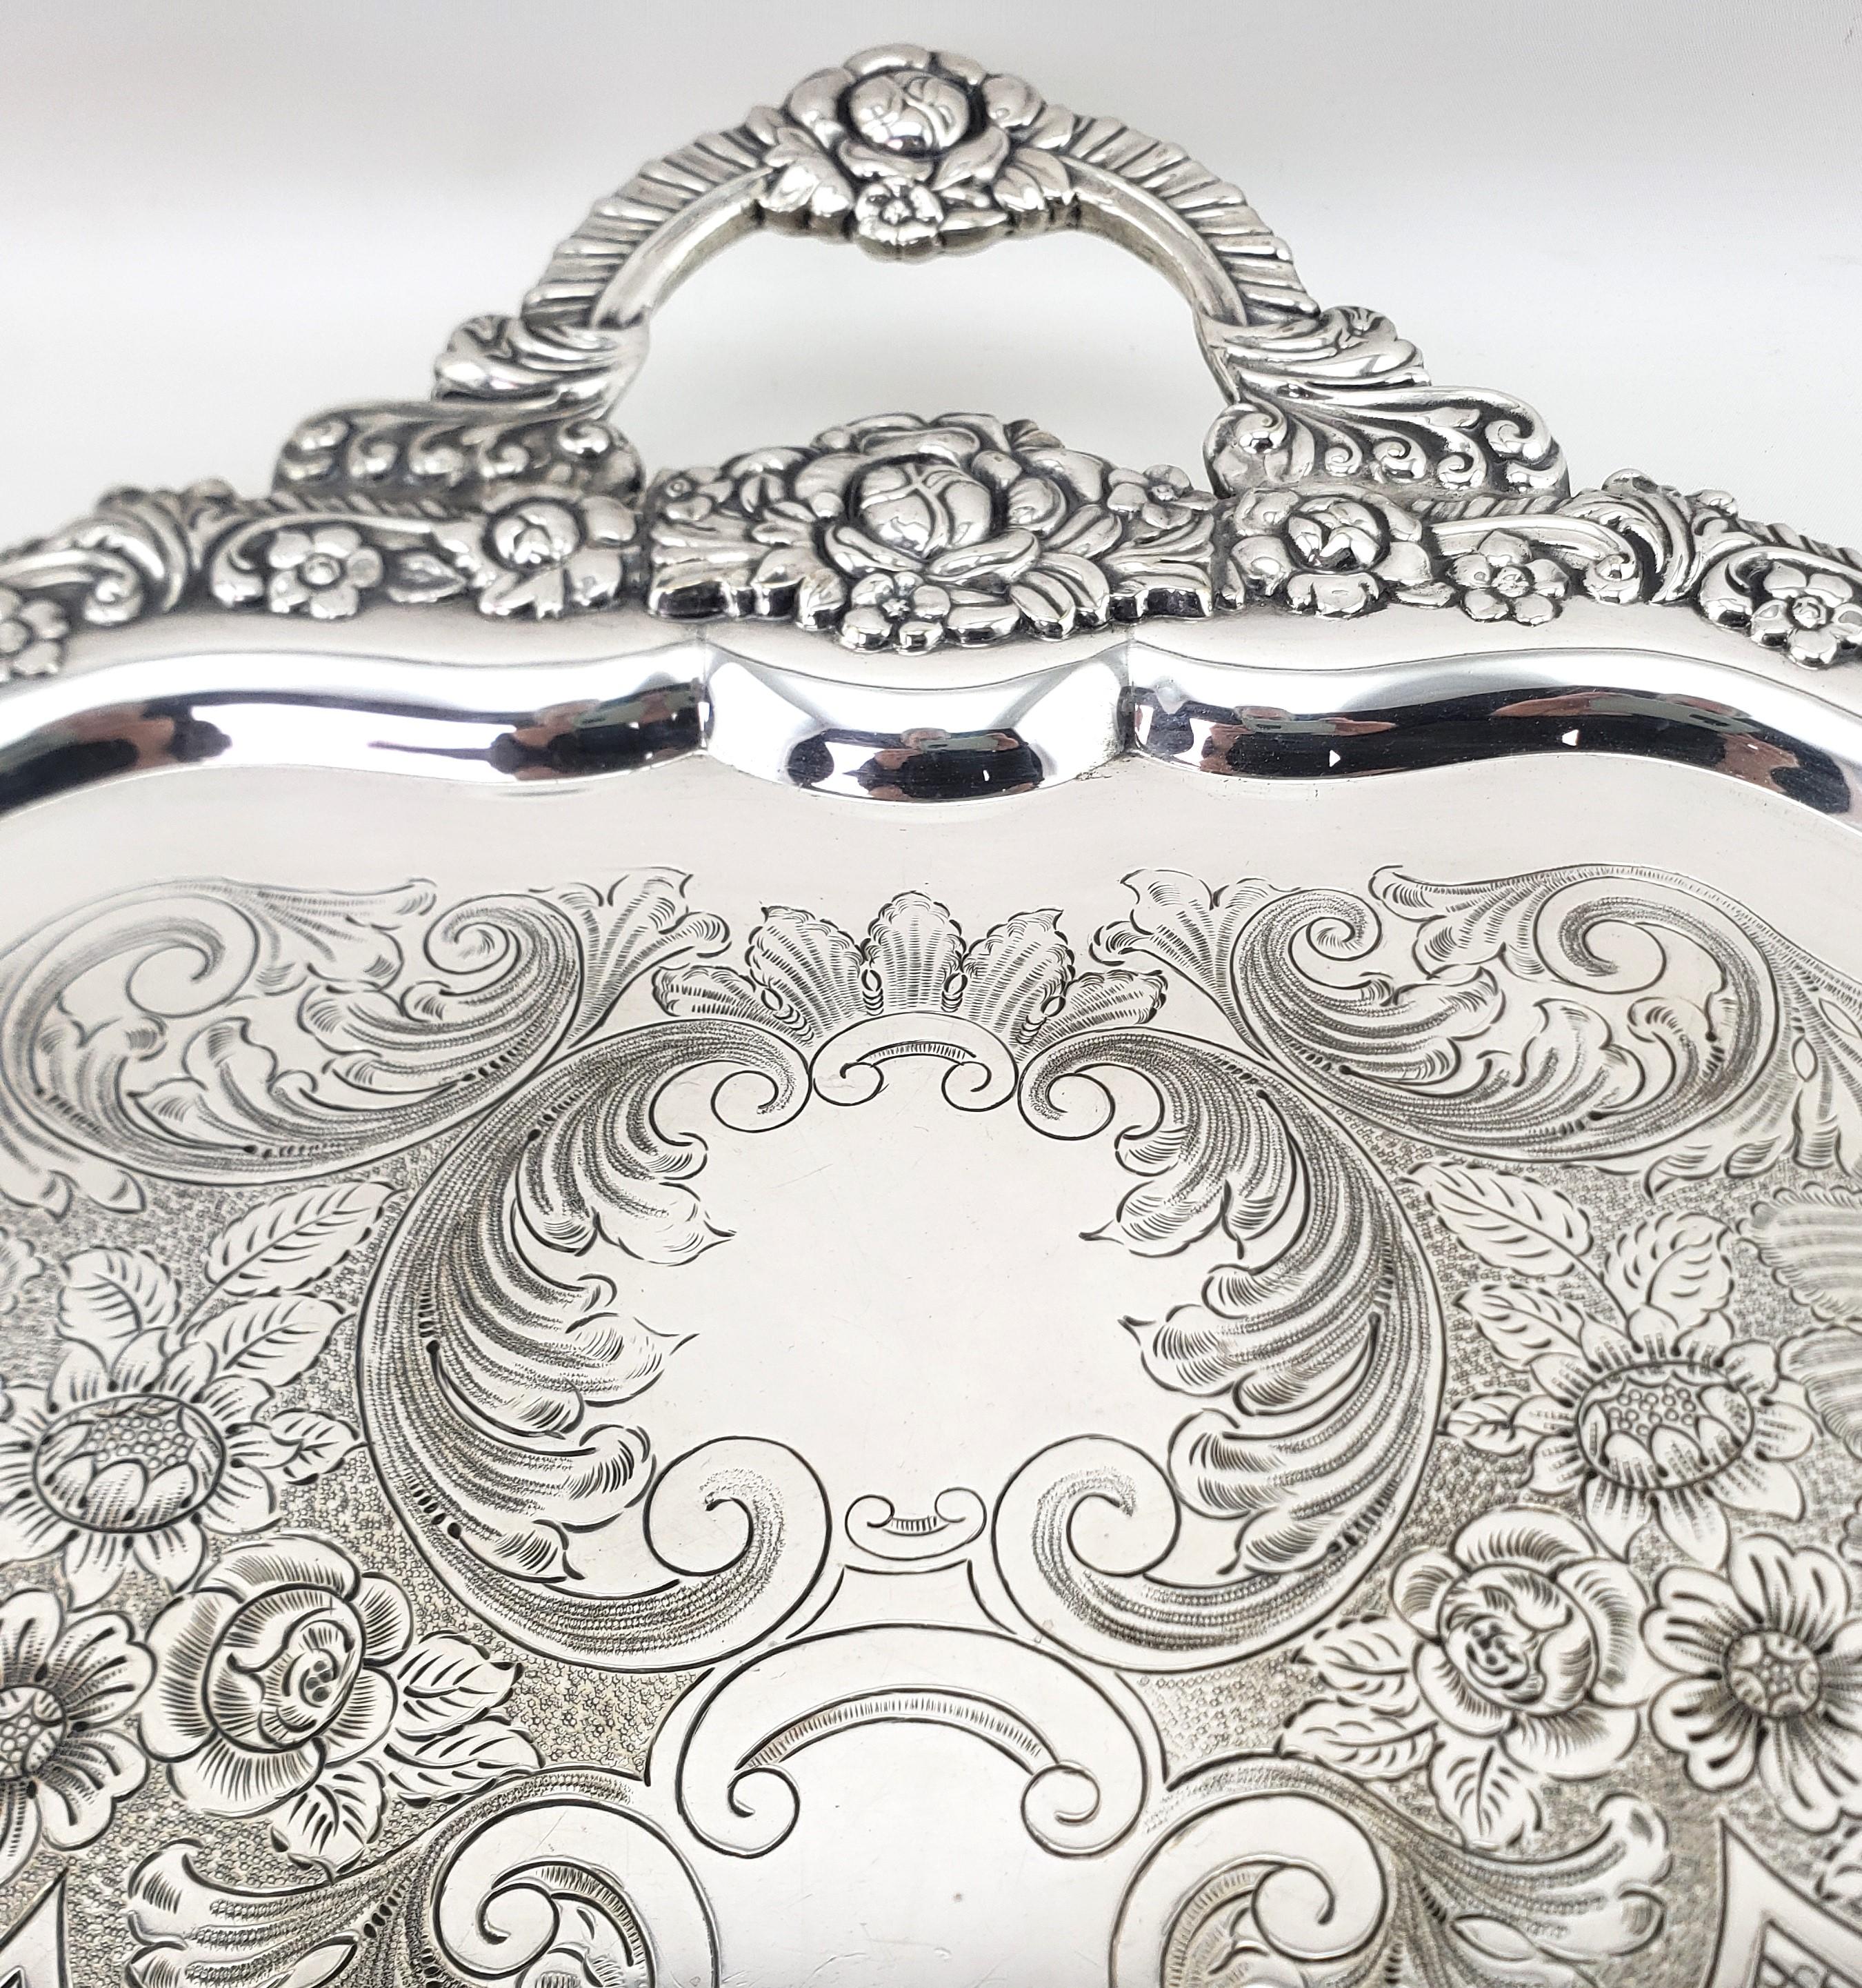 Large Antique English Silver Plated Serving Tray with Ornate Floral Decoration For Sale 1